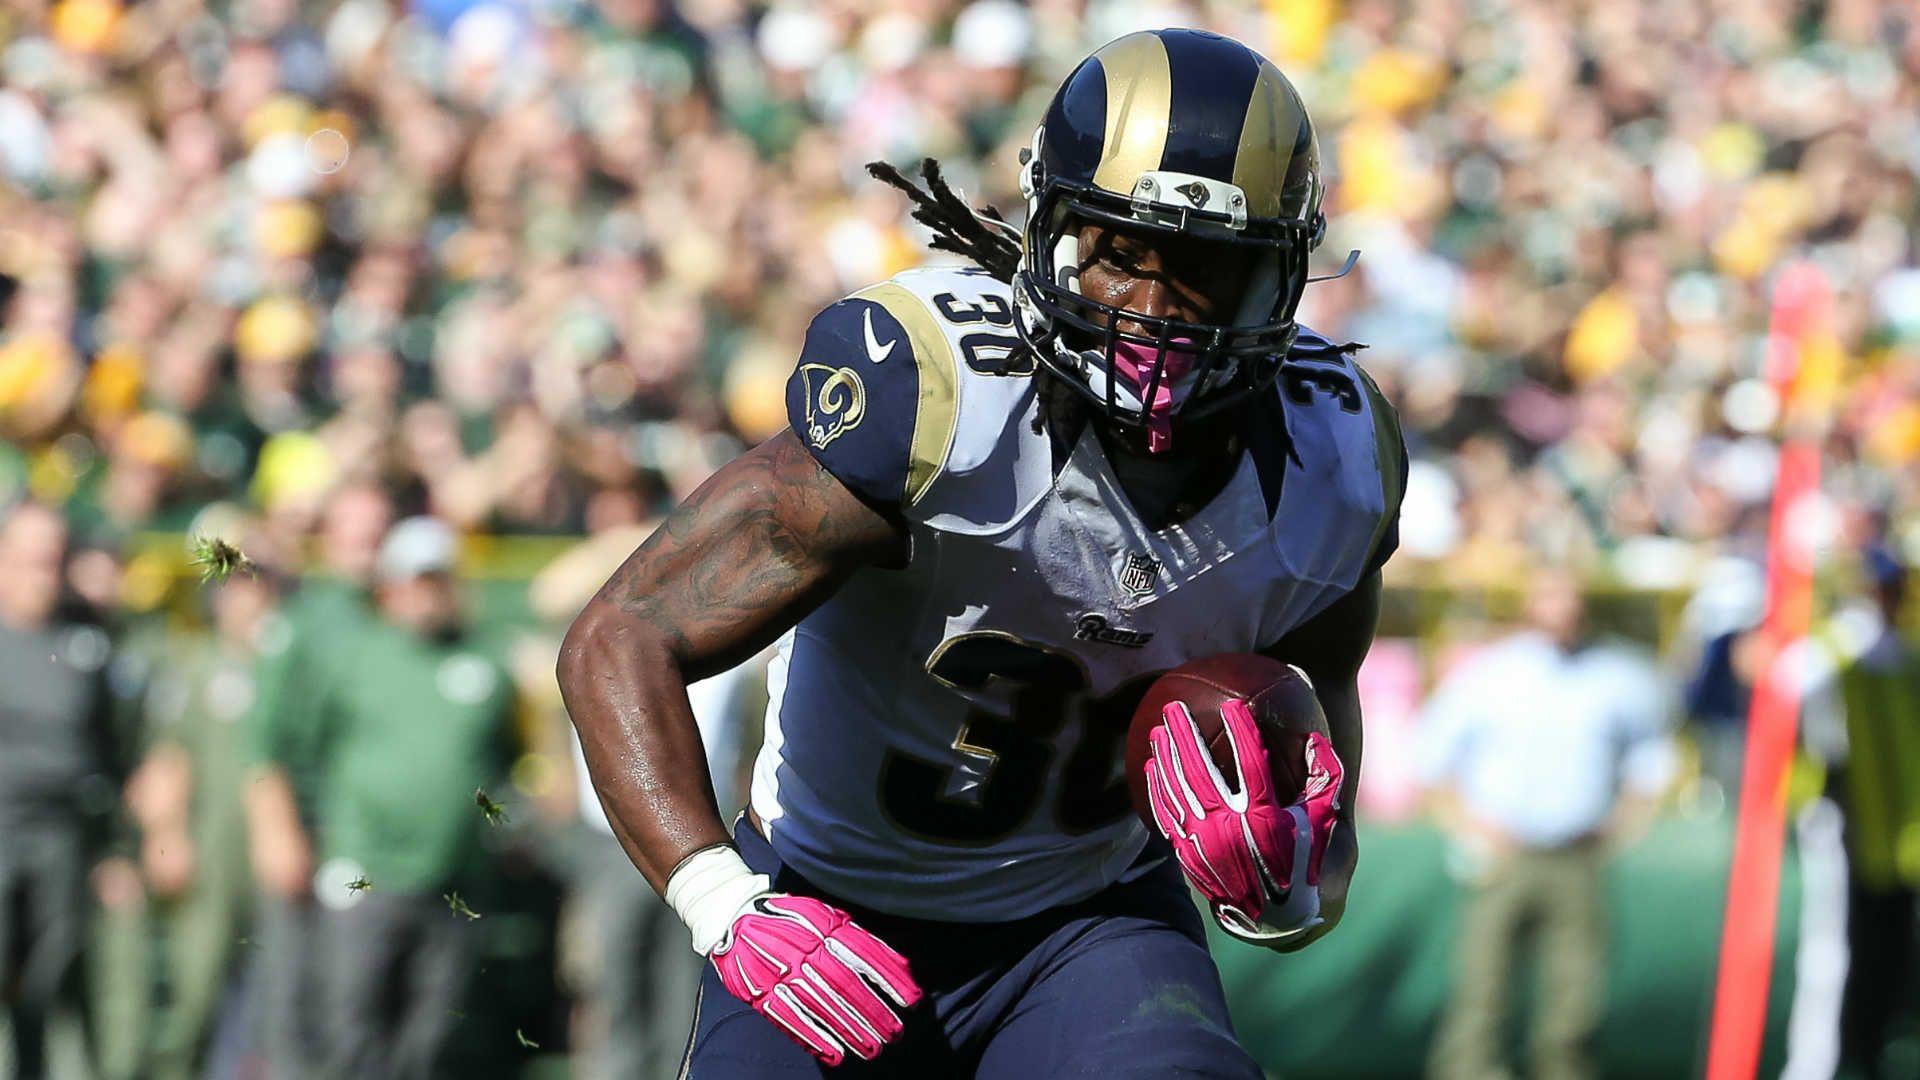 NFL rookie rankings: Rams' Todd Gurley sprints to top